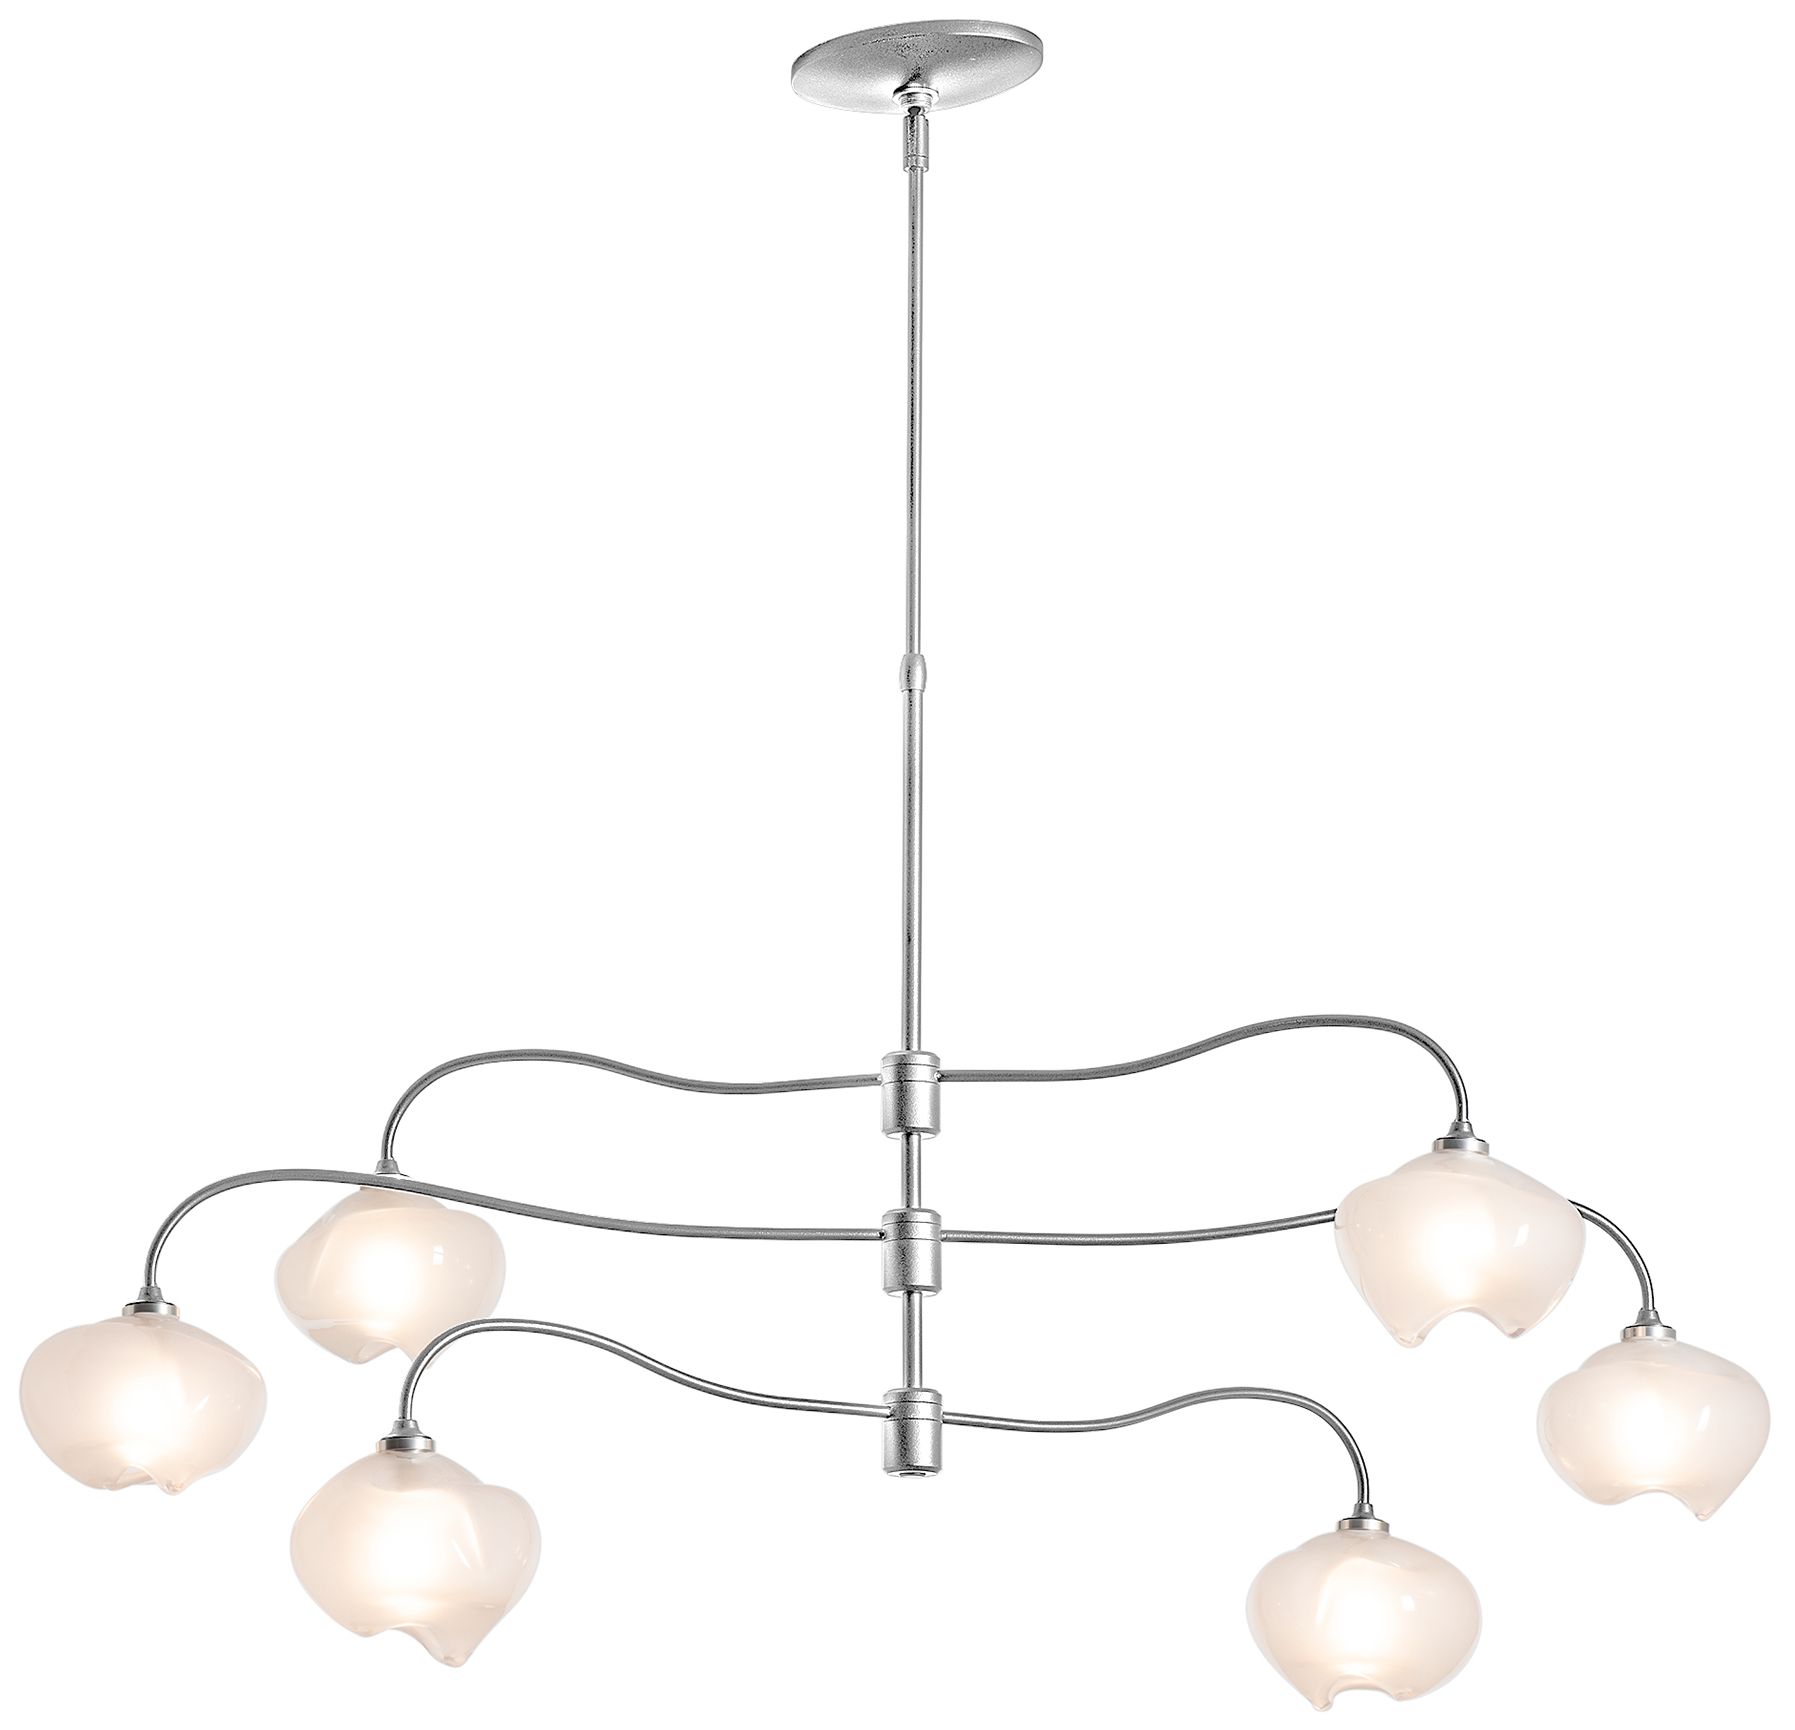 Ume 6-Light Pendant - Sterling Finish - Ume Frosted Glass - Standard Height